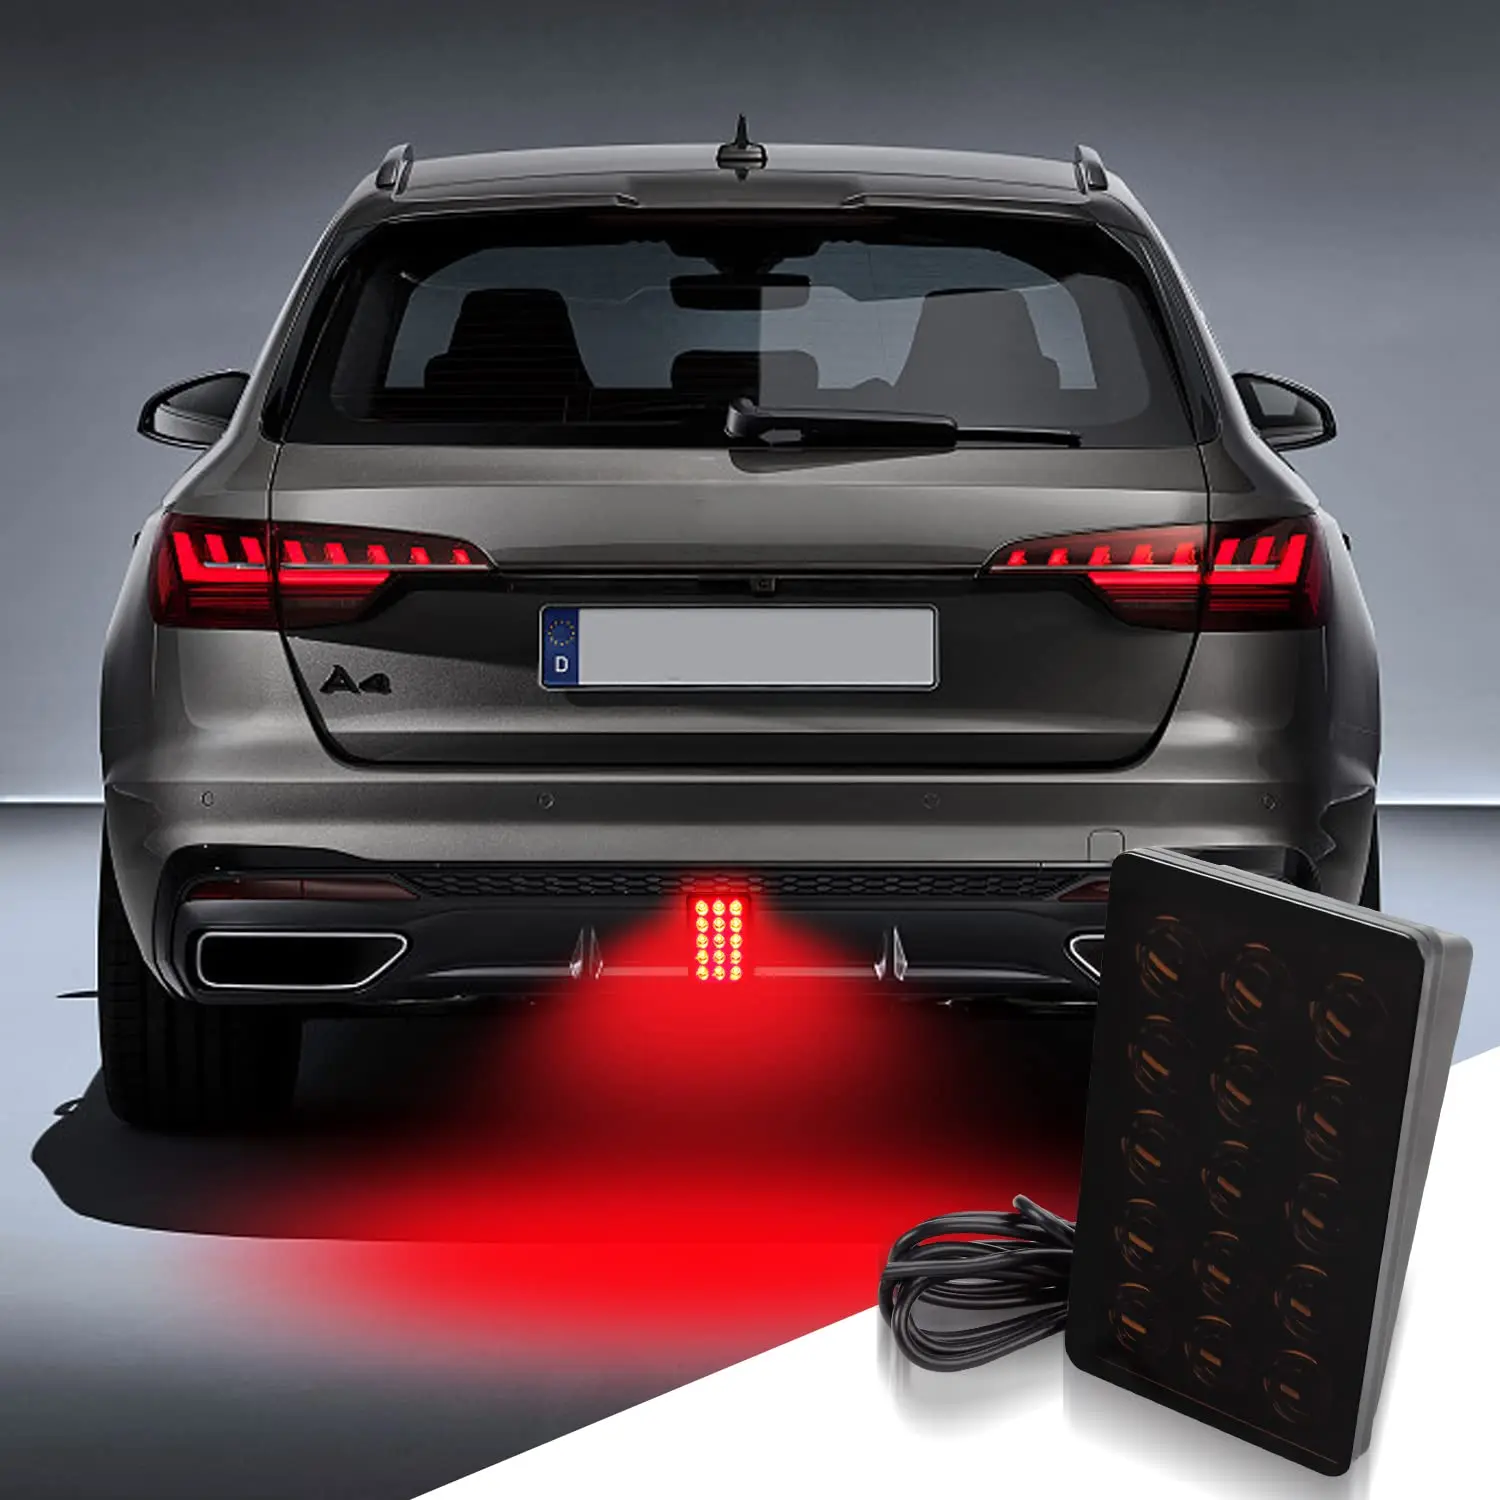 

F1 Style Led Brake Pilot Lights 12V 15led Rear Tail Lights Auto Flash Warning Reverse Stop Safety Signal Lamps For Car SUV Moto